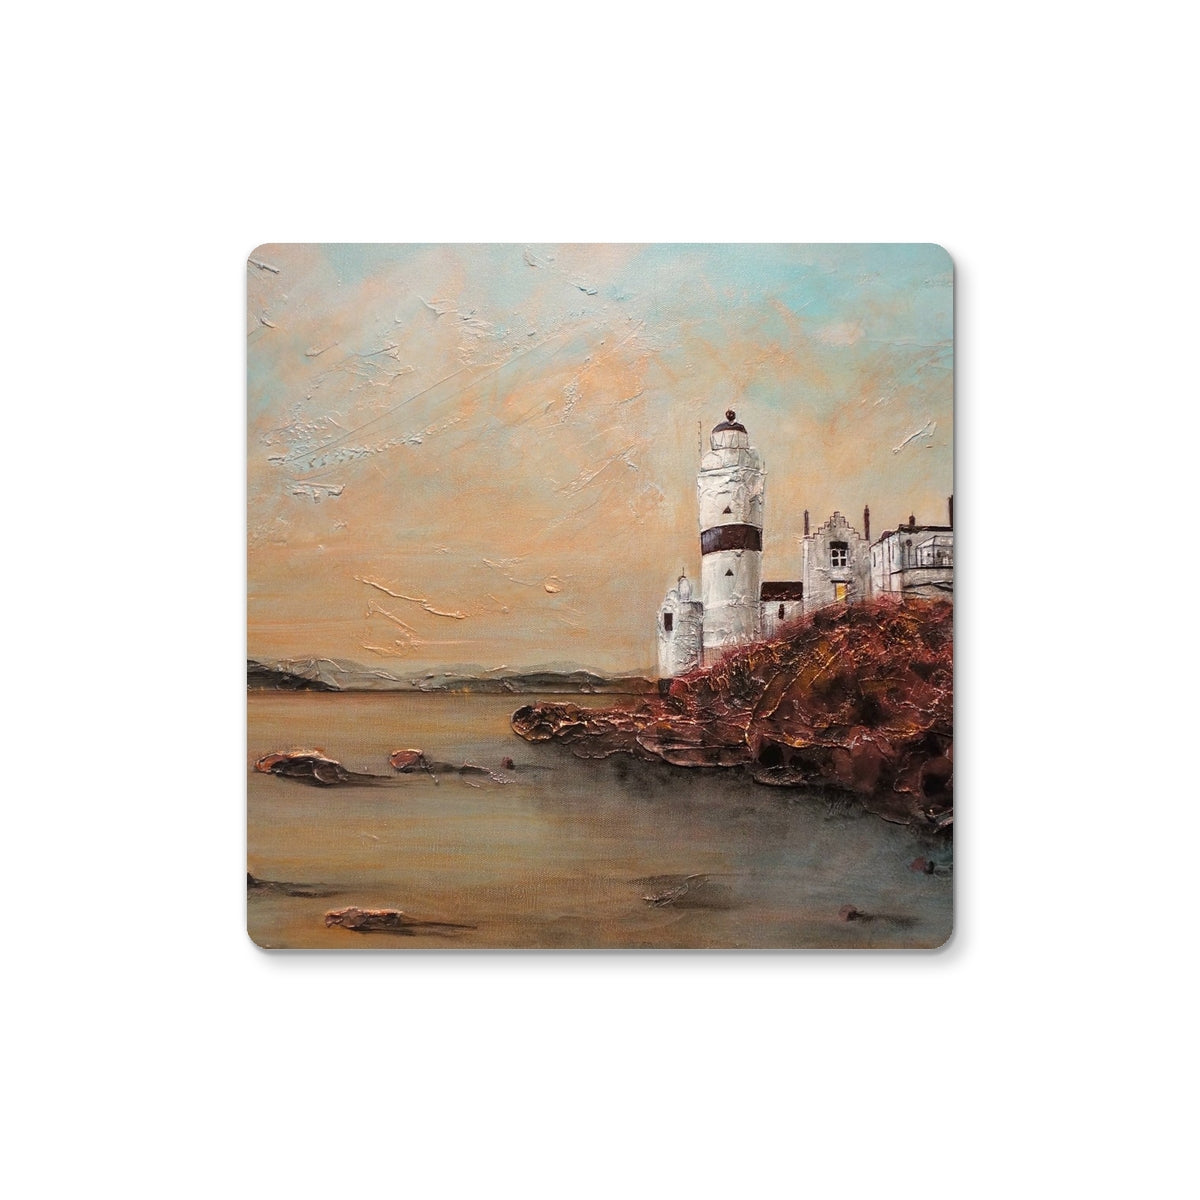 Cloch Lighthouse Dawn Art Gifts Coaster-Homeware-River Clyde Art Gallery-Single Coaster-Paintings, Prints, Homeware, Art Gifts From Scotland By Scottish Artist Kevin Hunter